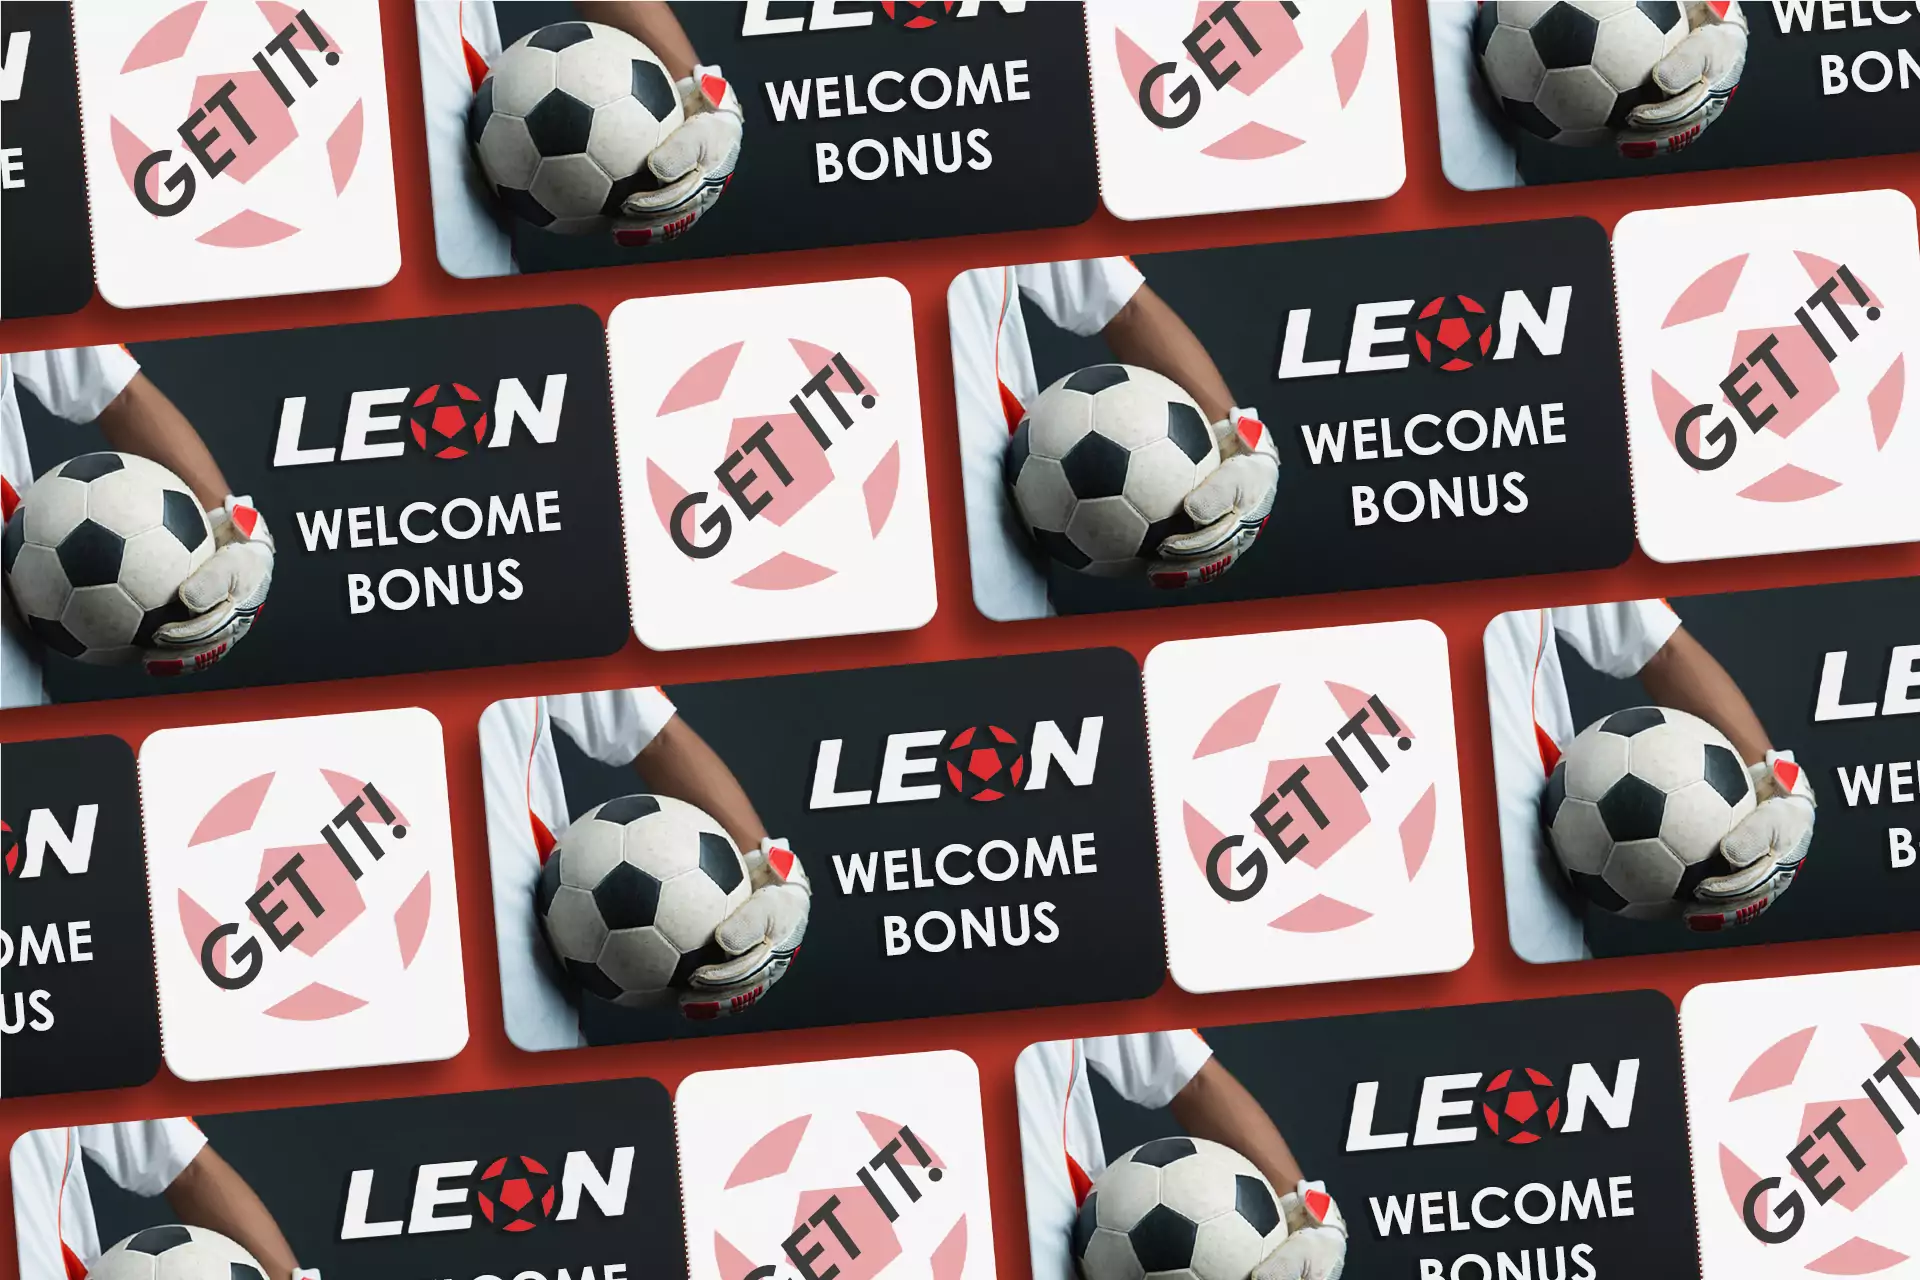 If you are a new user at Leon Bet you can count on the getting a welcome bonus.